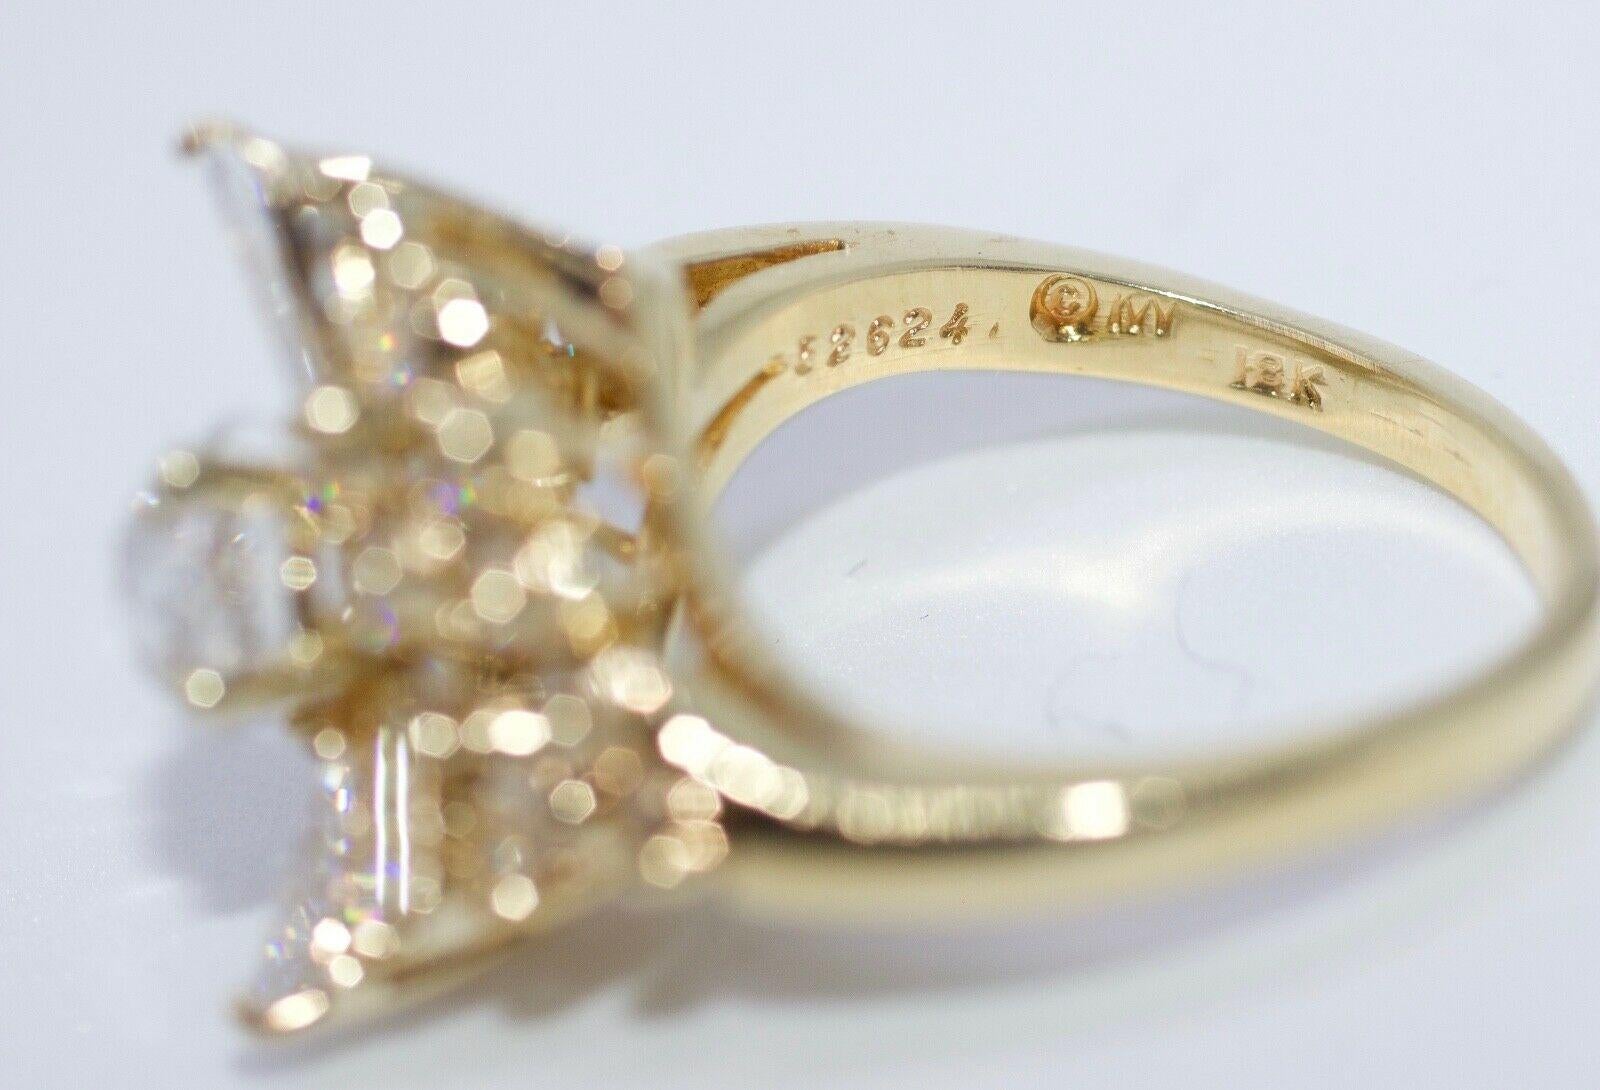 This is a gorgeous Kurt Wayne 18k Yellow Gold Round European Cut Diamond With Baguette And Round Diamonds Ring. This ring is size 6.5 and weighs in at 6.8 grams. The center diamond is a bright Round European  Cut Diamond that weighs .78 Carats. The